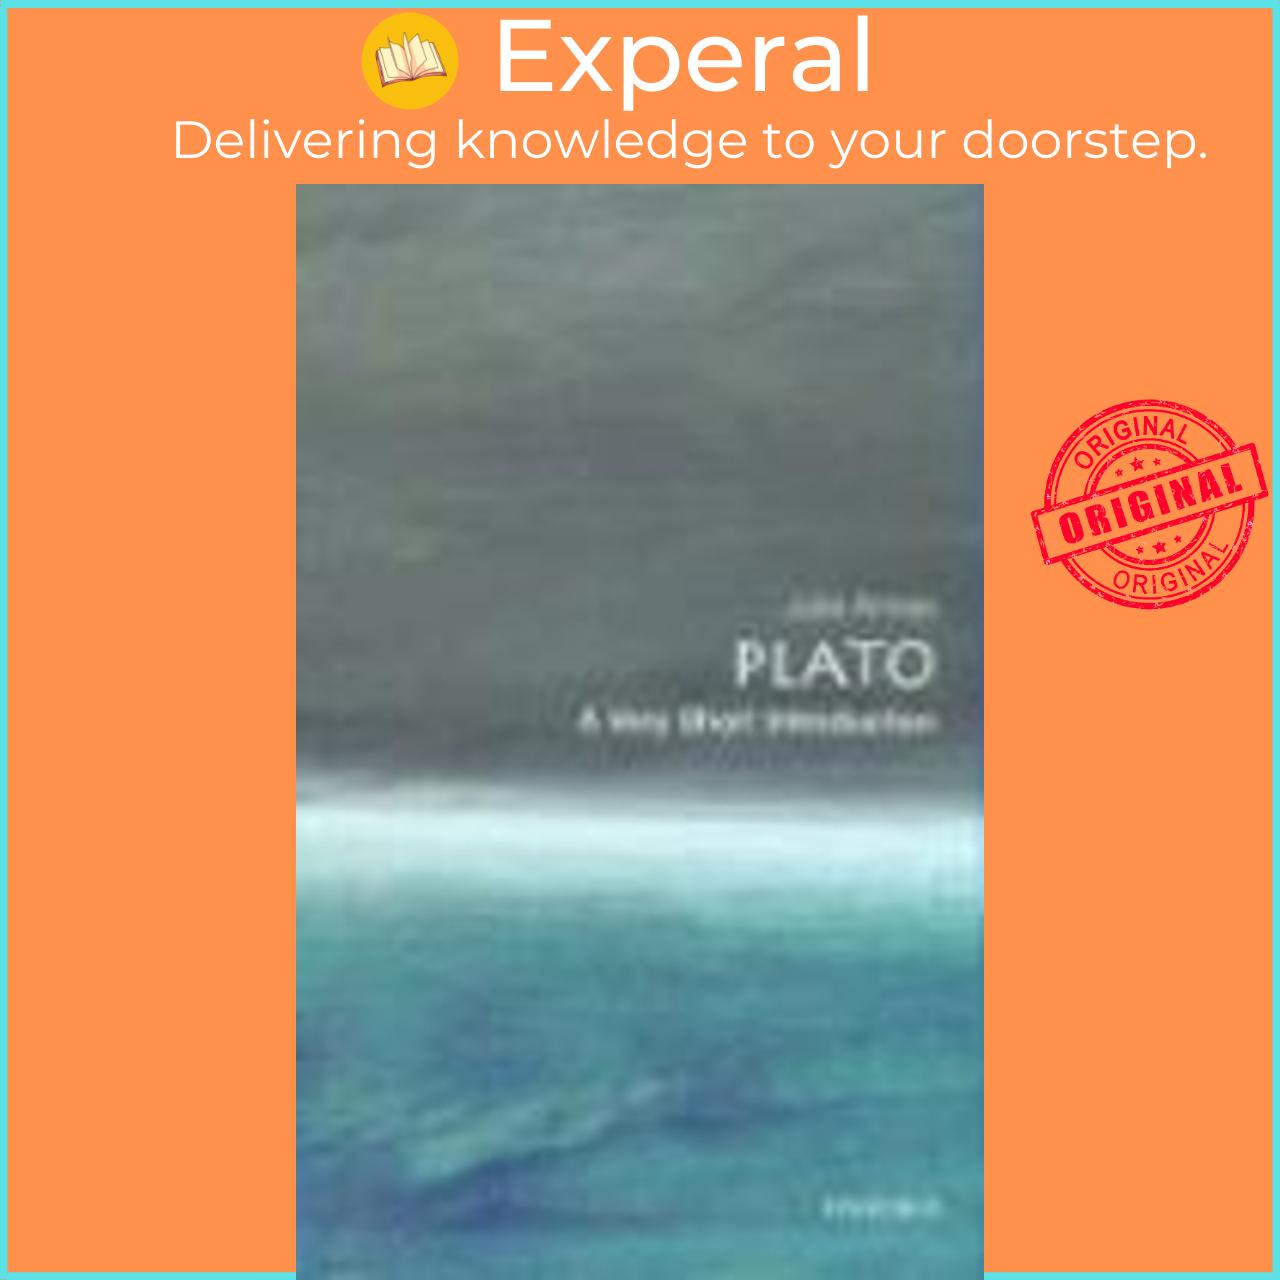 Sách - Plato: A Very Short Introduction by Julia Annas (UK edition, paperback)